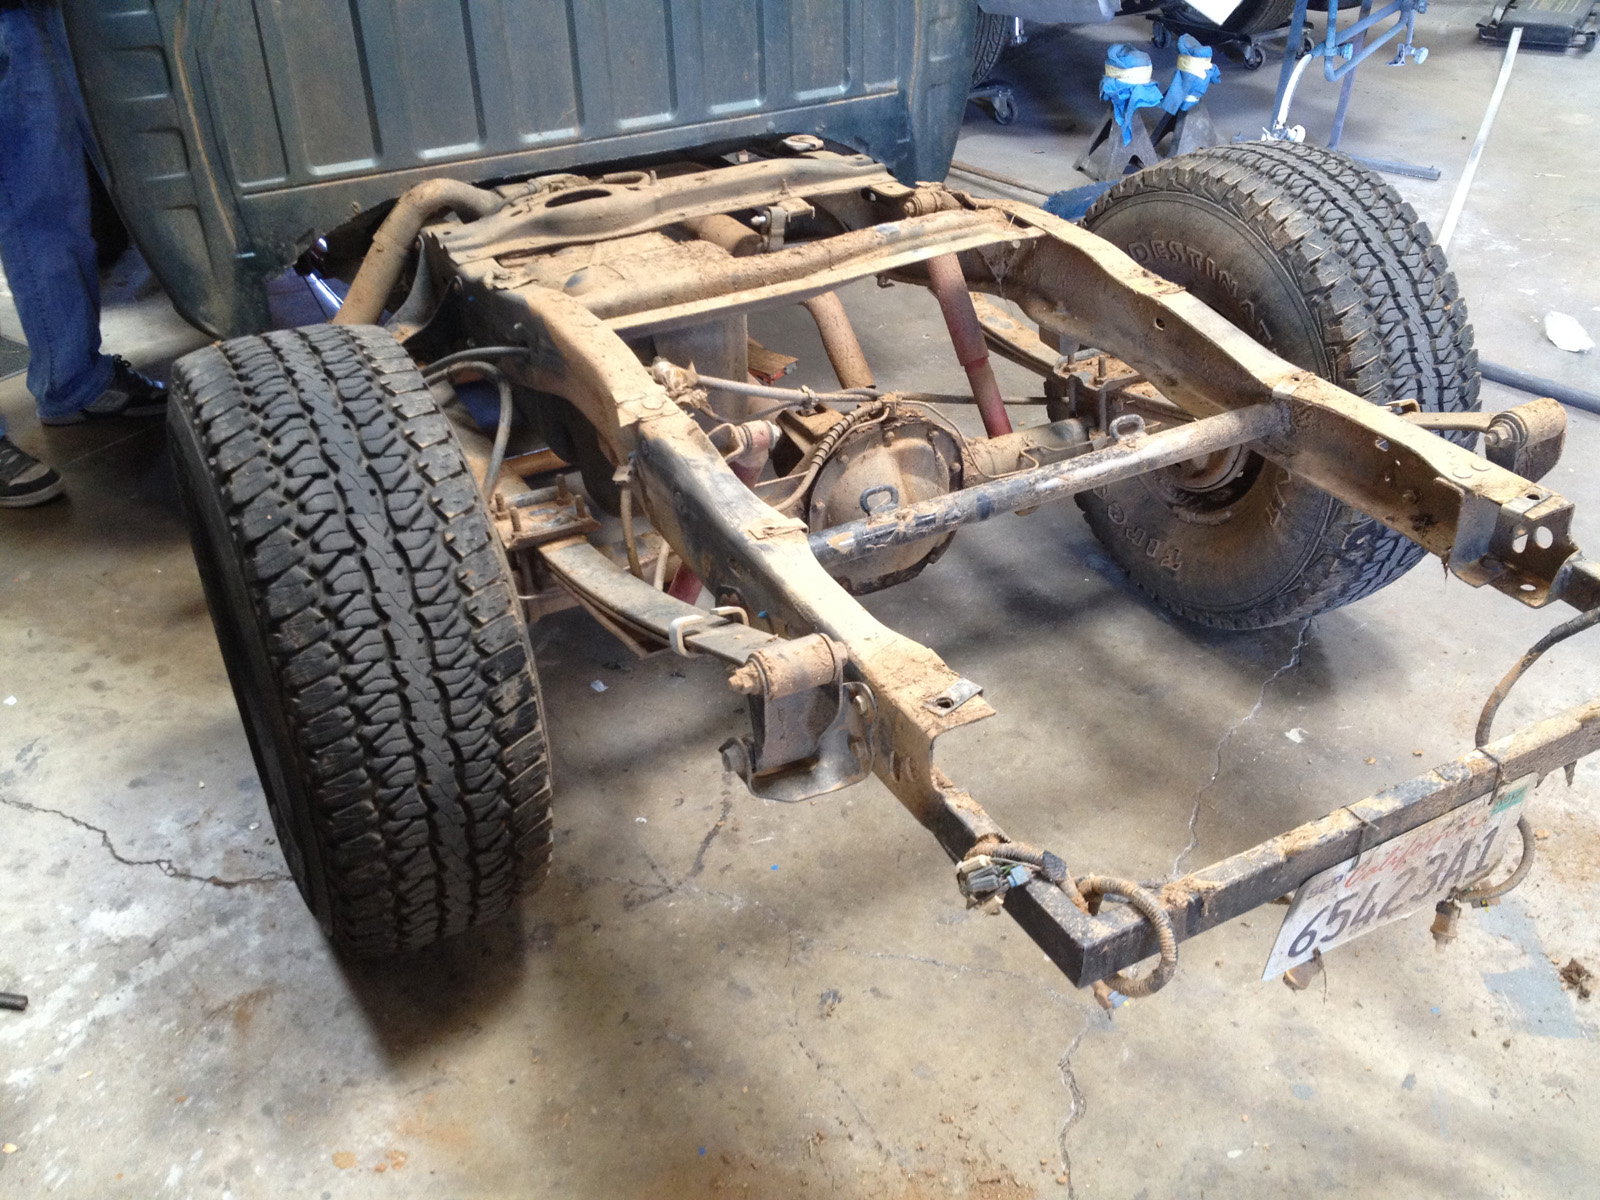 Ford ranger roll cage build #5